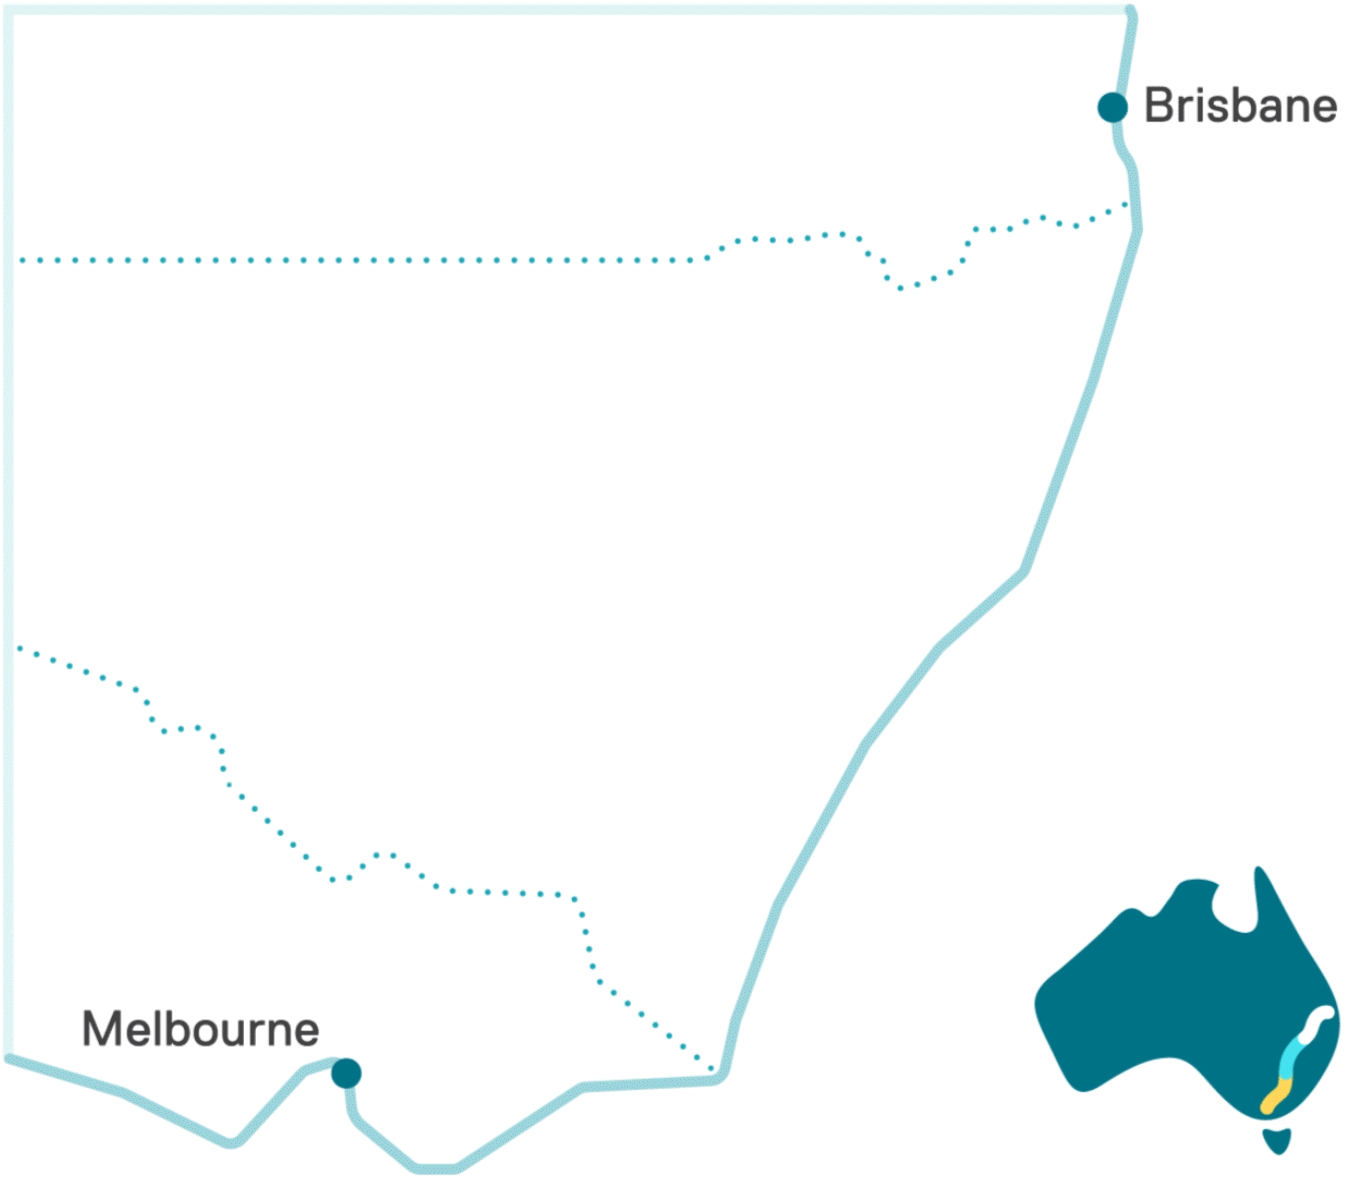 Animated GIF image showing the Inland Rail route from Beveridge in Victoria to Kagaru in Queensland.